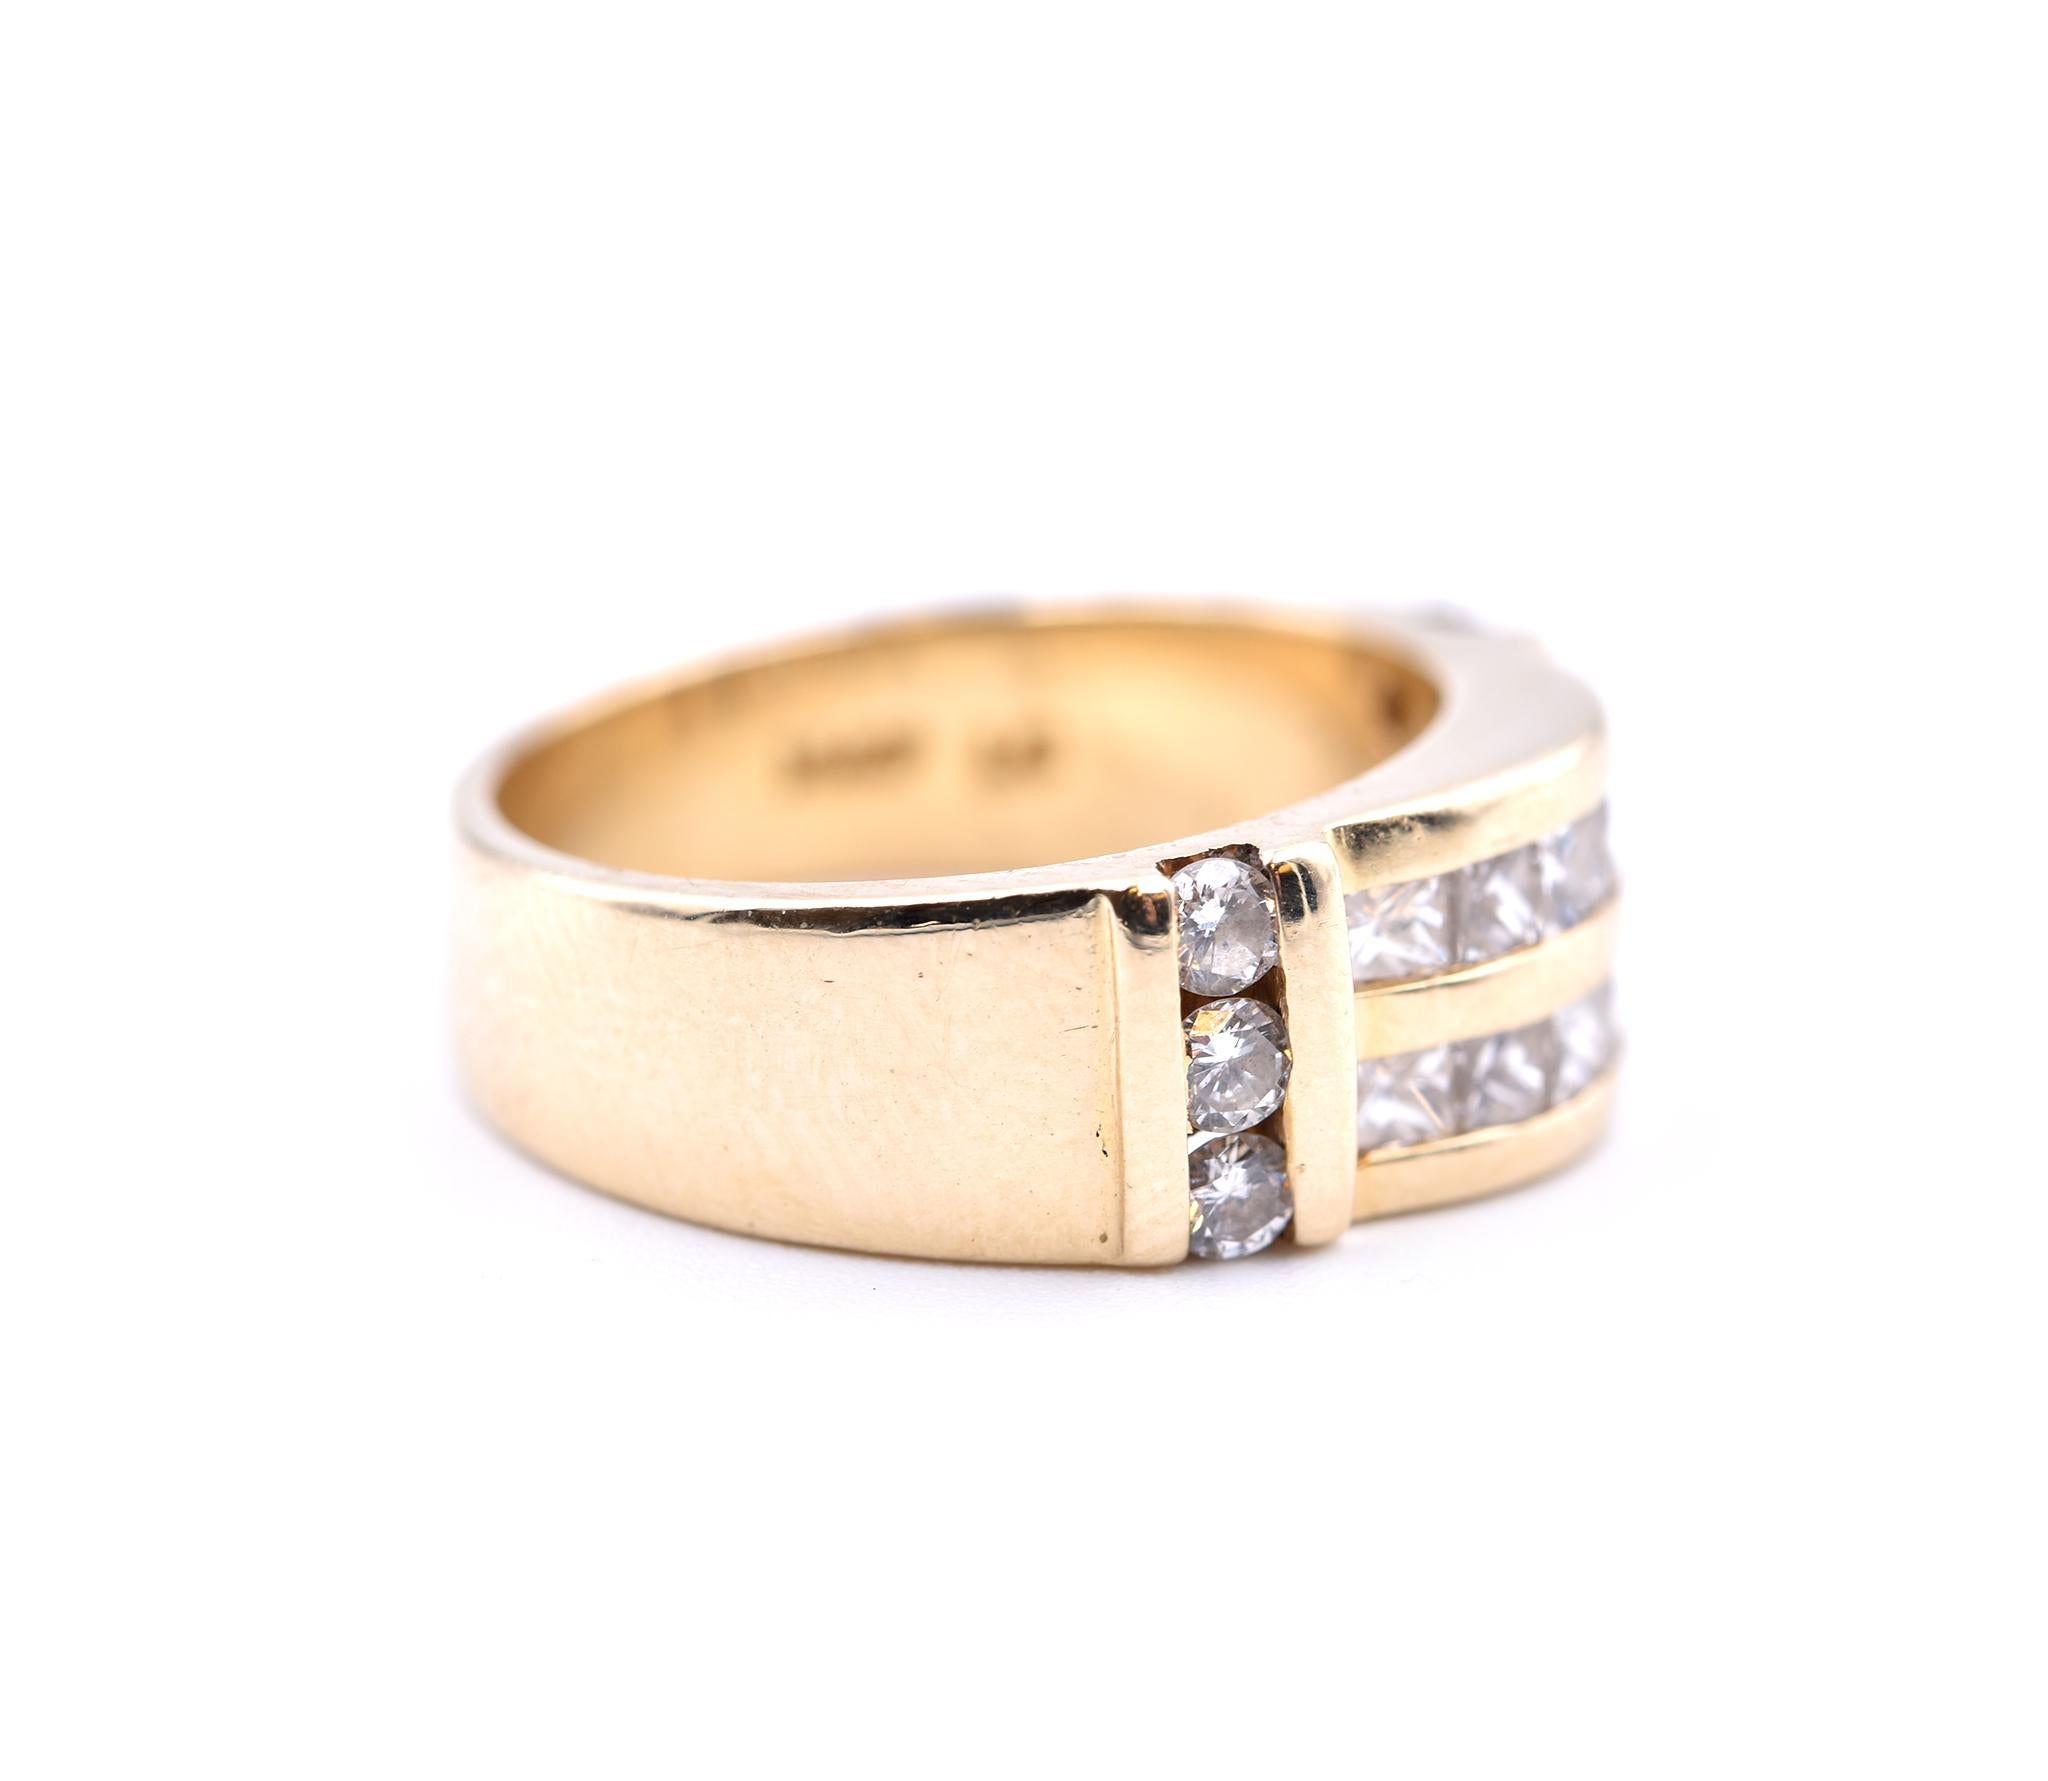 Designer: custom design
Material: 14k yellow gold
Diamonds: 12 princess cut = .85cttw
Color: H
Clarity: SI1
Diamonds: 6 round brilliant cut = .30cttw
Color: H
Clarity: SI1
Ring Size: 6 (please allow two additional shipping days for sizing